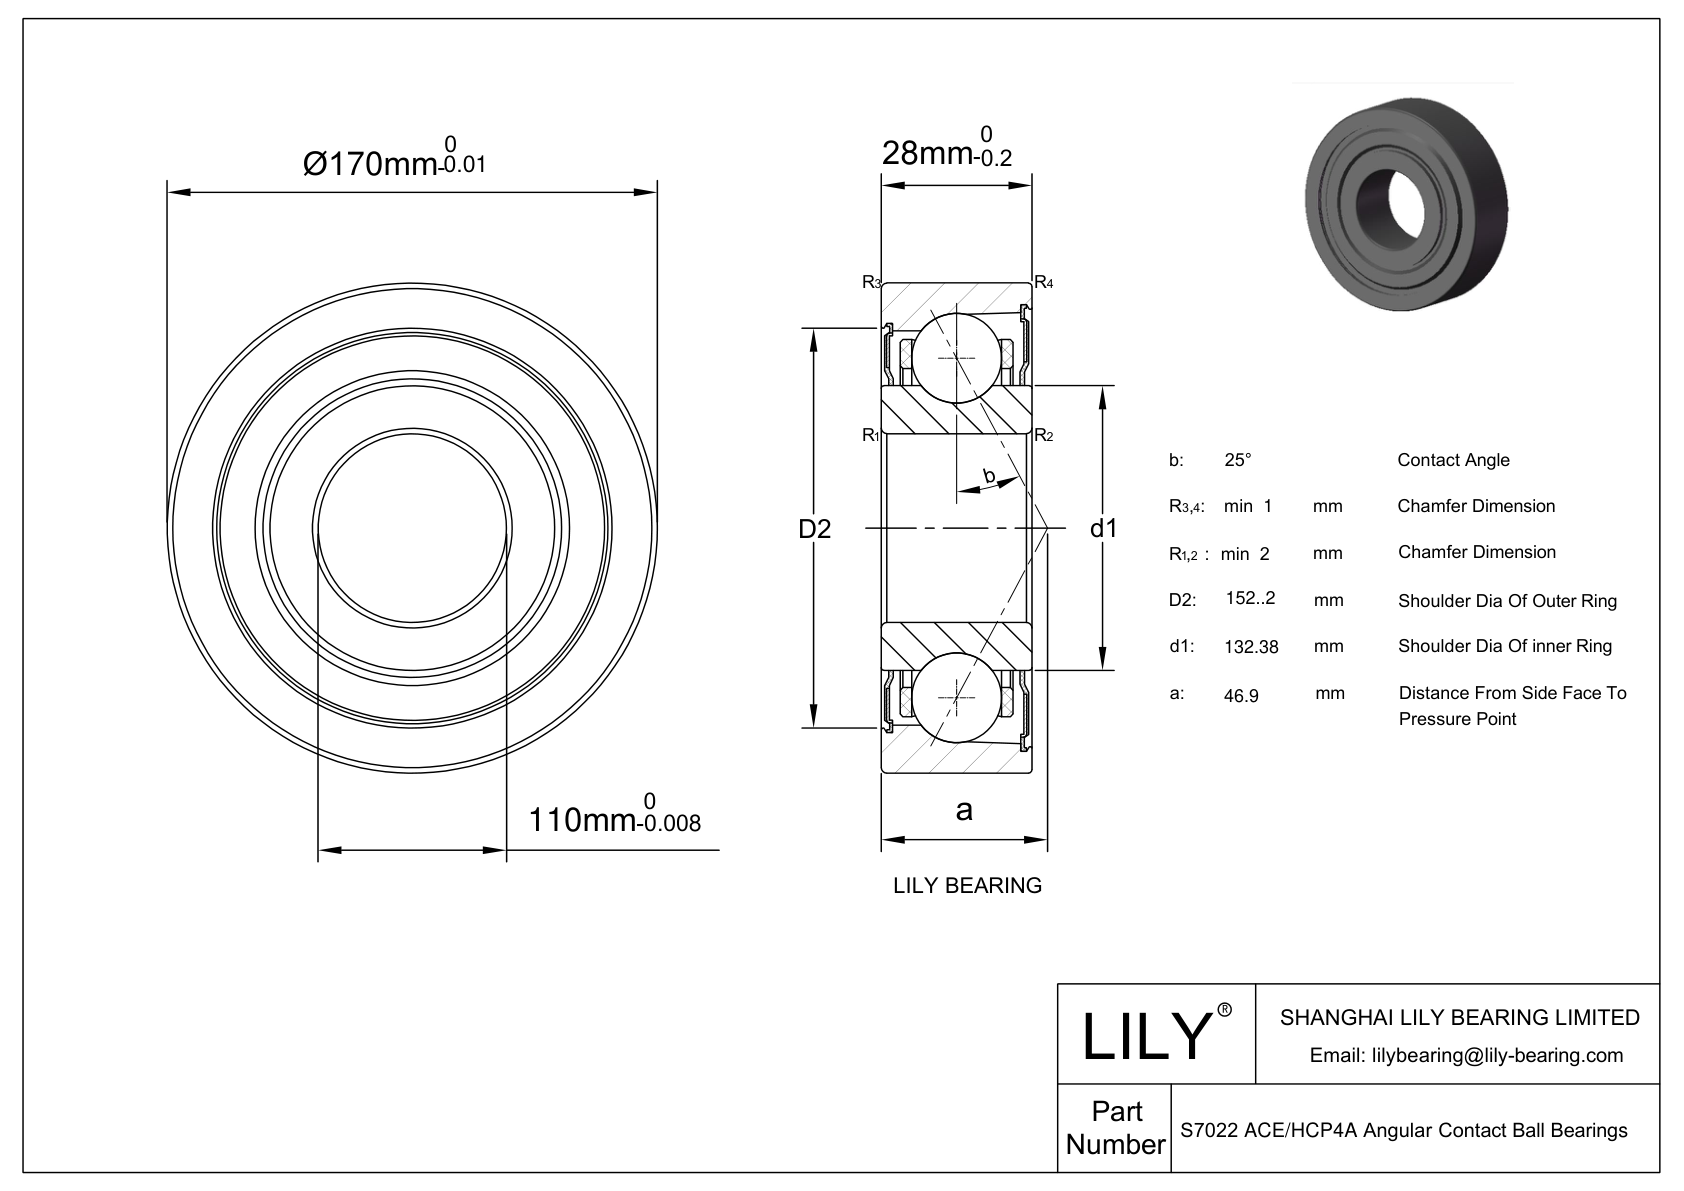 S7022 ACE/HCP4A Super Precision Angular Contact Ball Bearings cad drawing